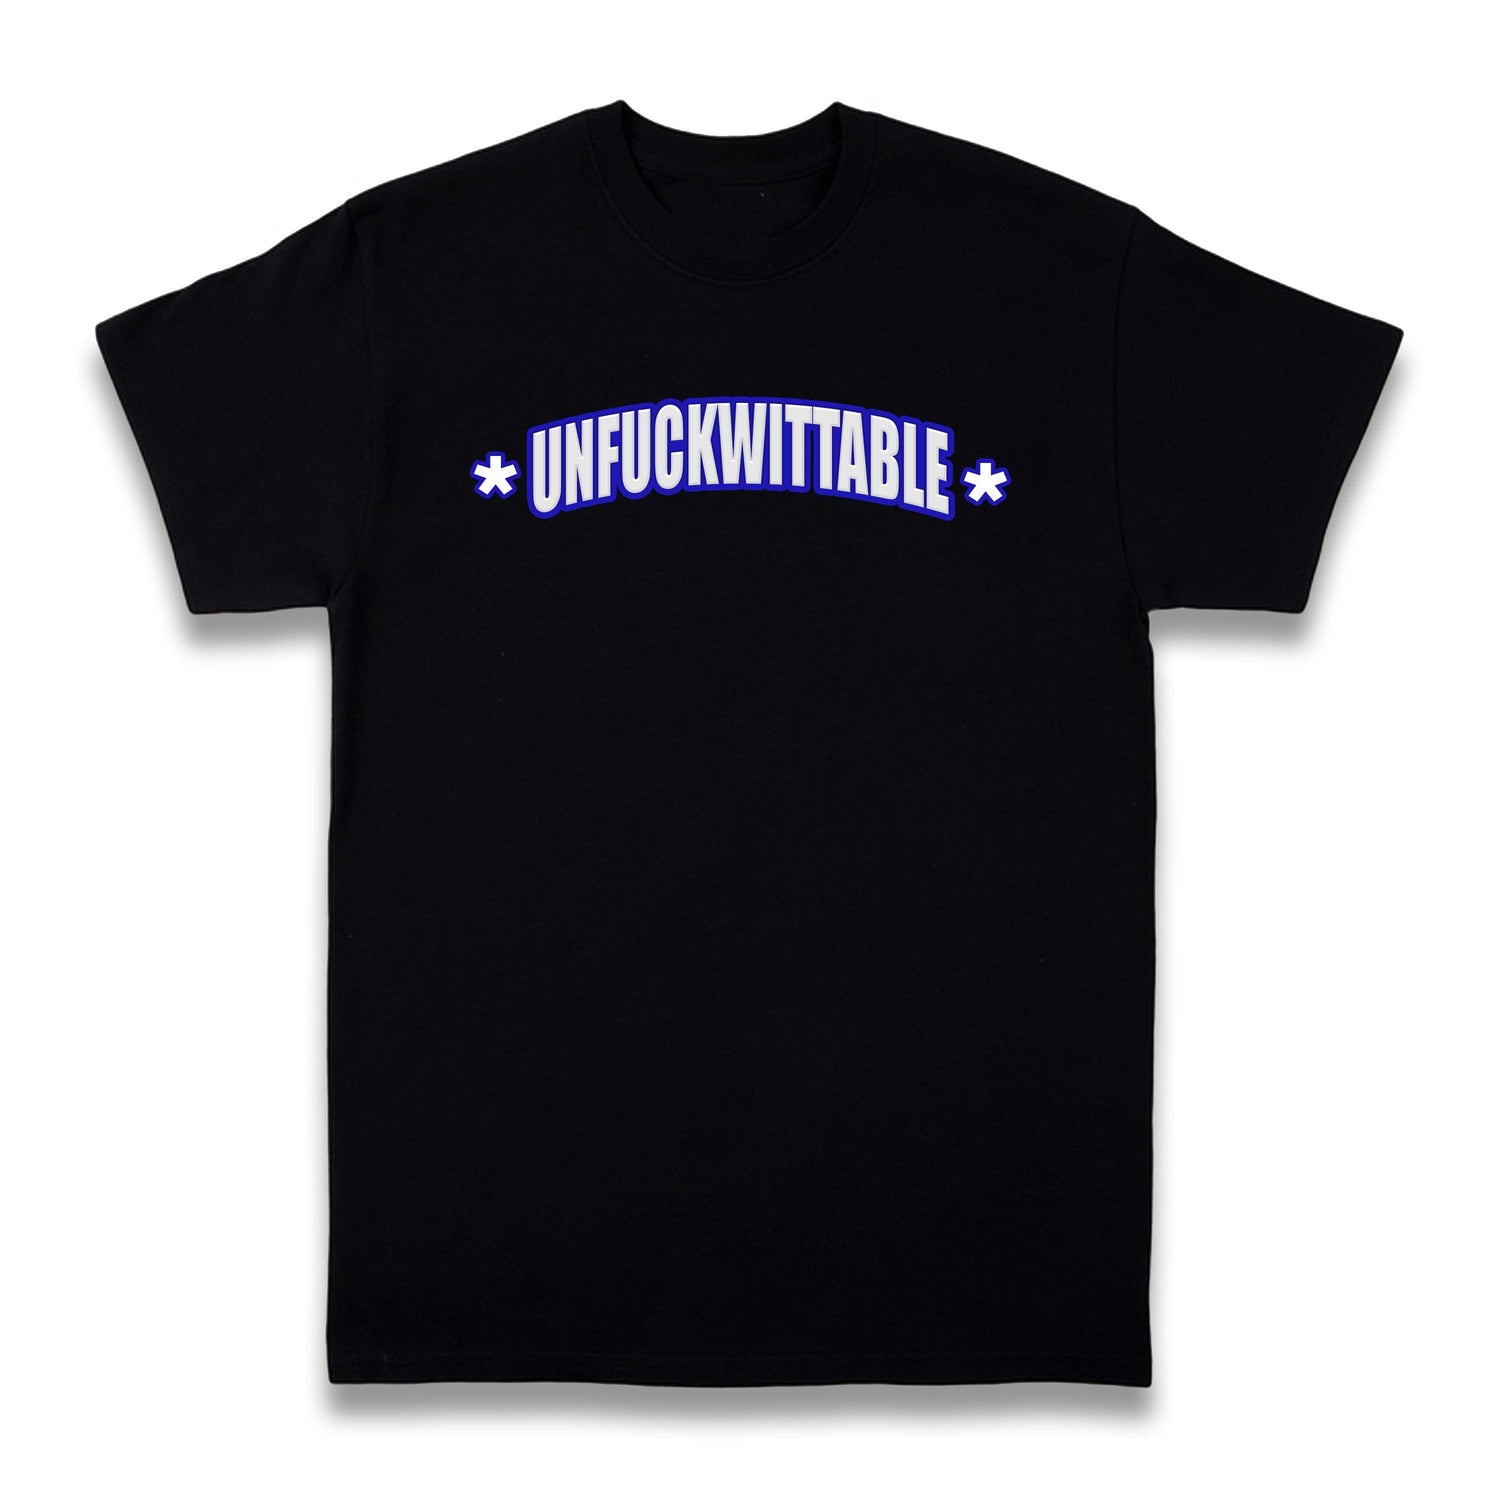 UNFUCKWITTABLE COLLECTION - Famous Club Clothing